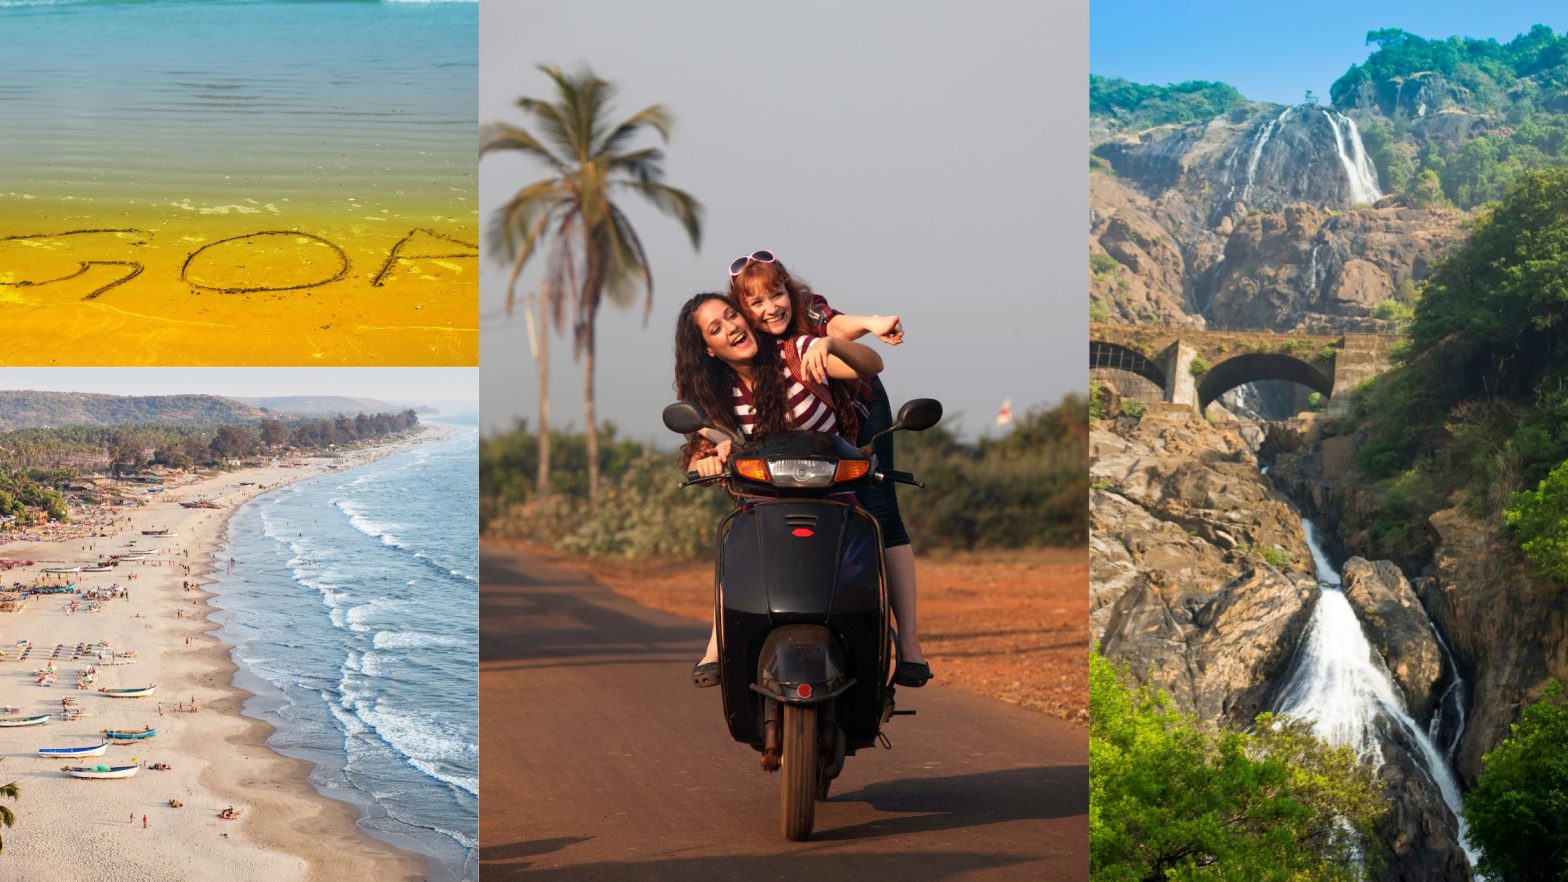 The image shows a foreign tourist digital nomad in India riding a scooter in Goa India